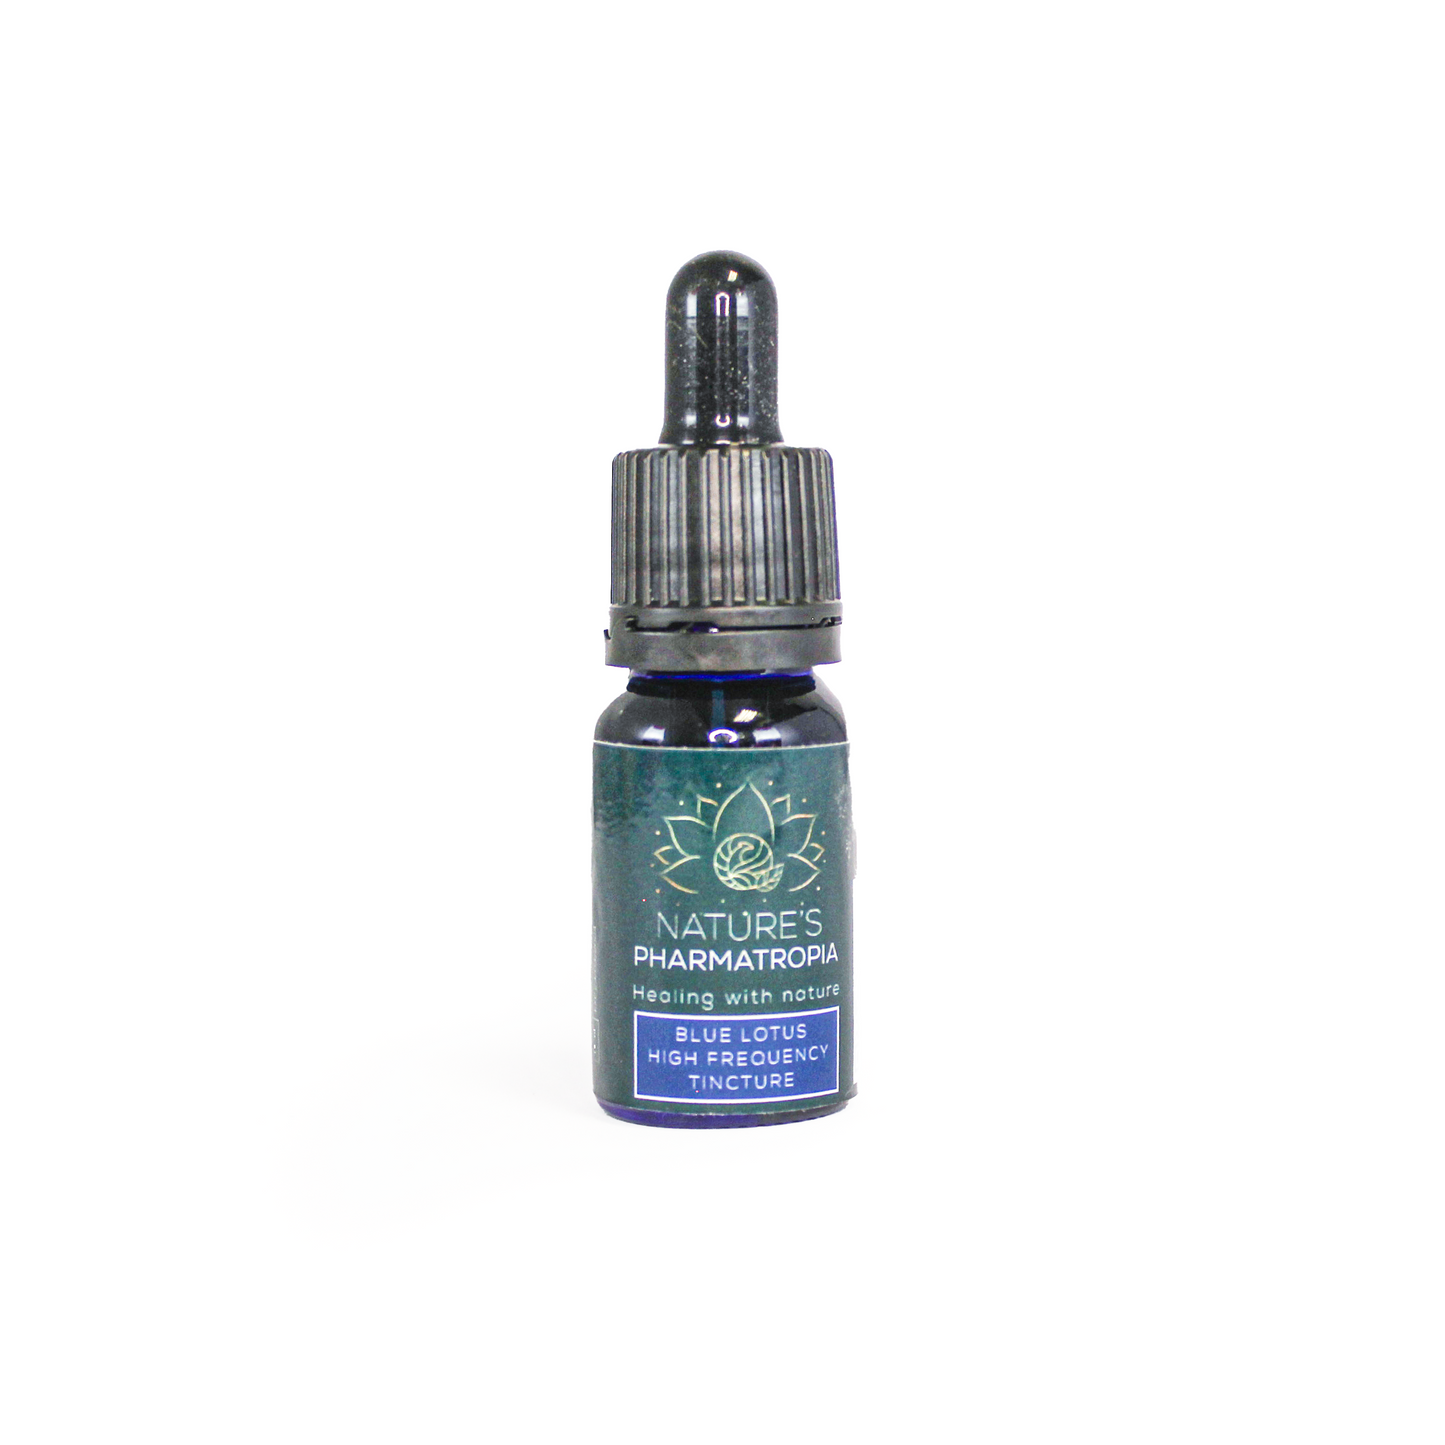 Blue Lotus High Frequency Tincture - 30ml